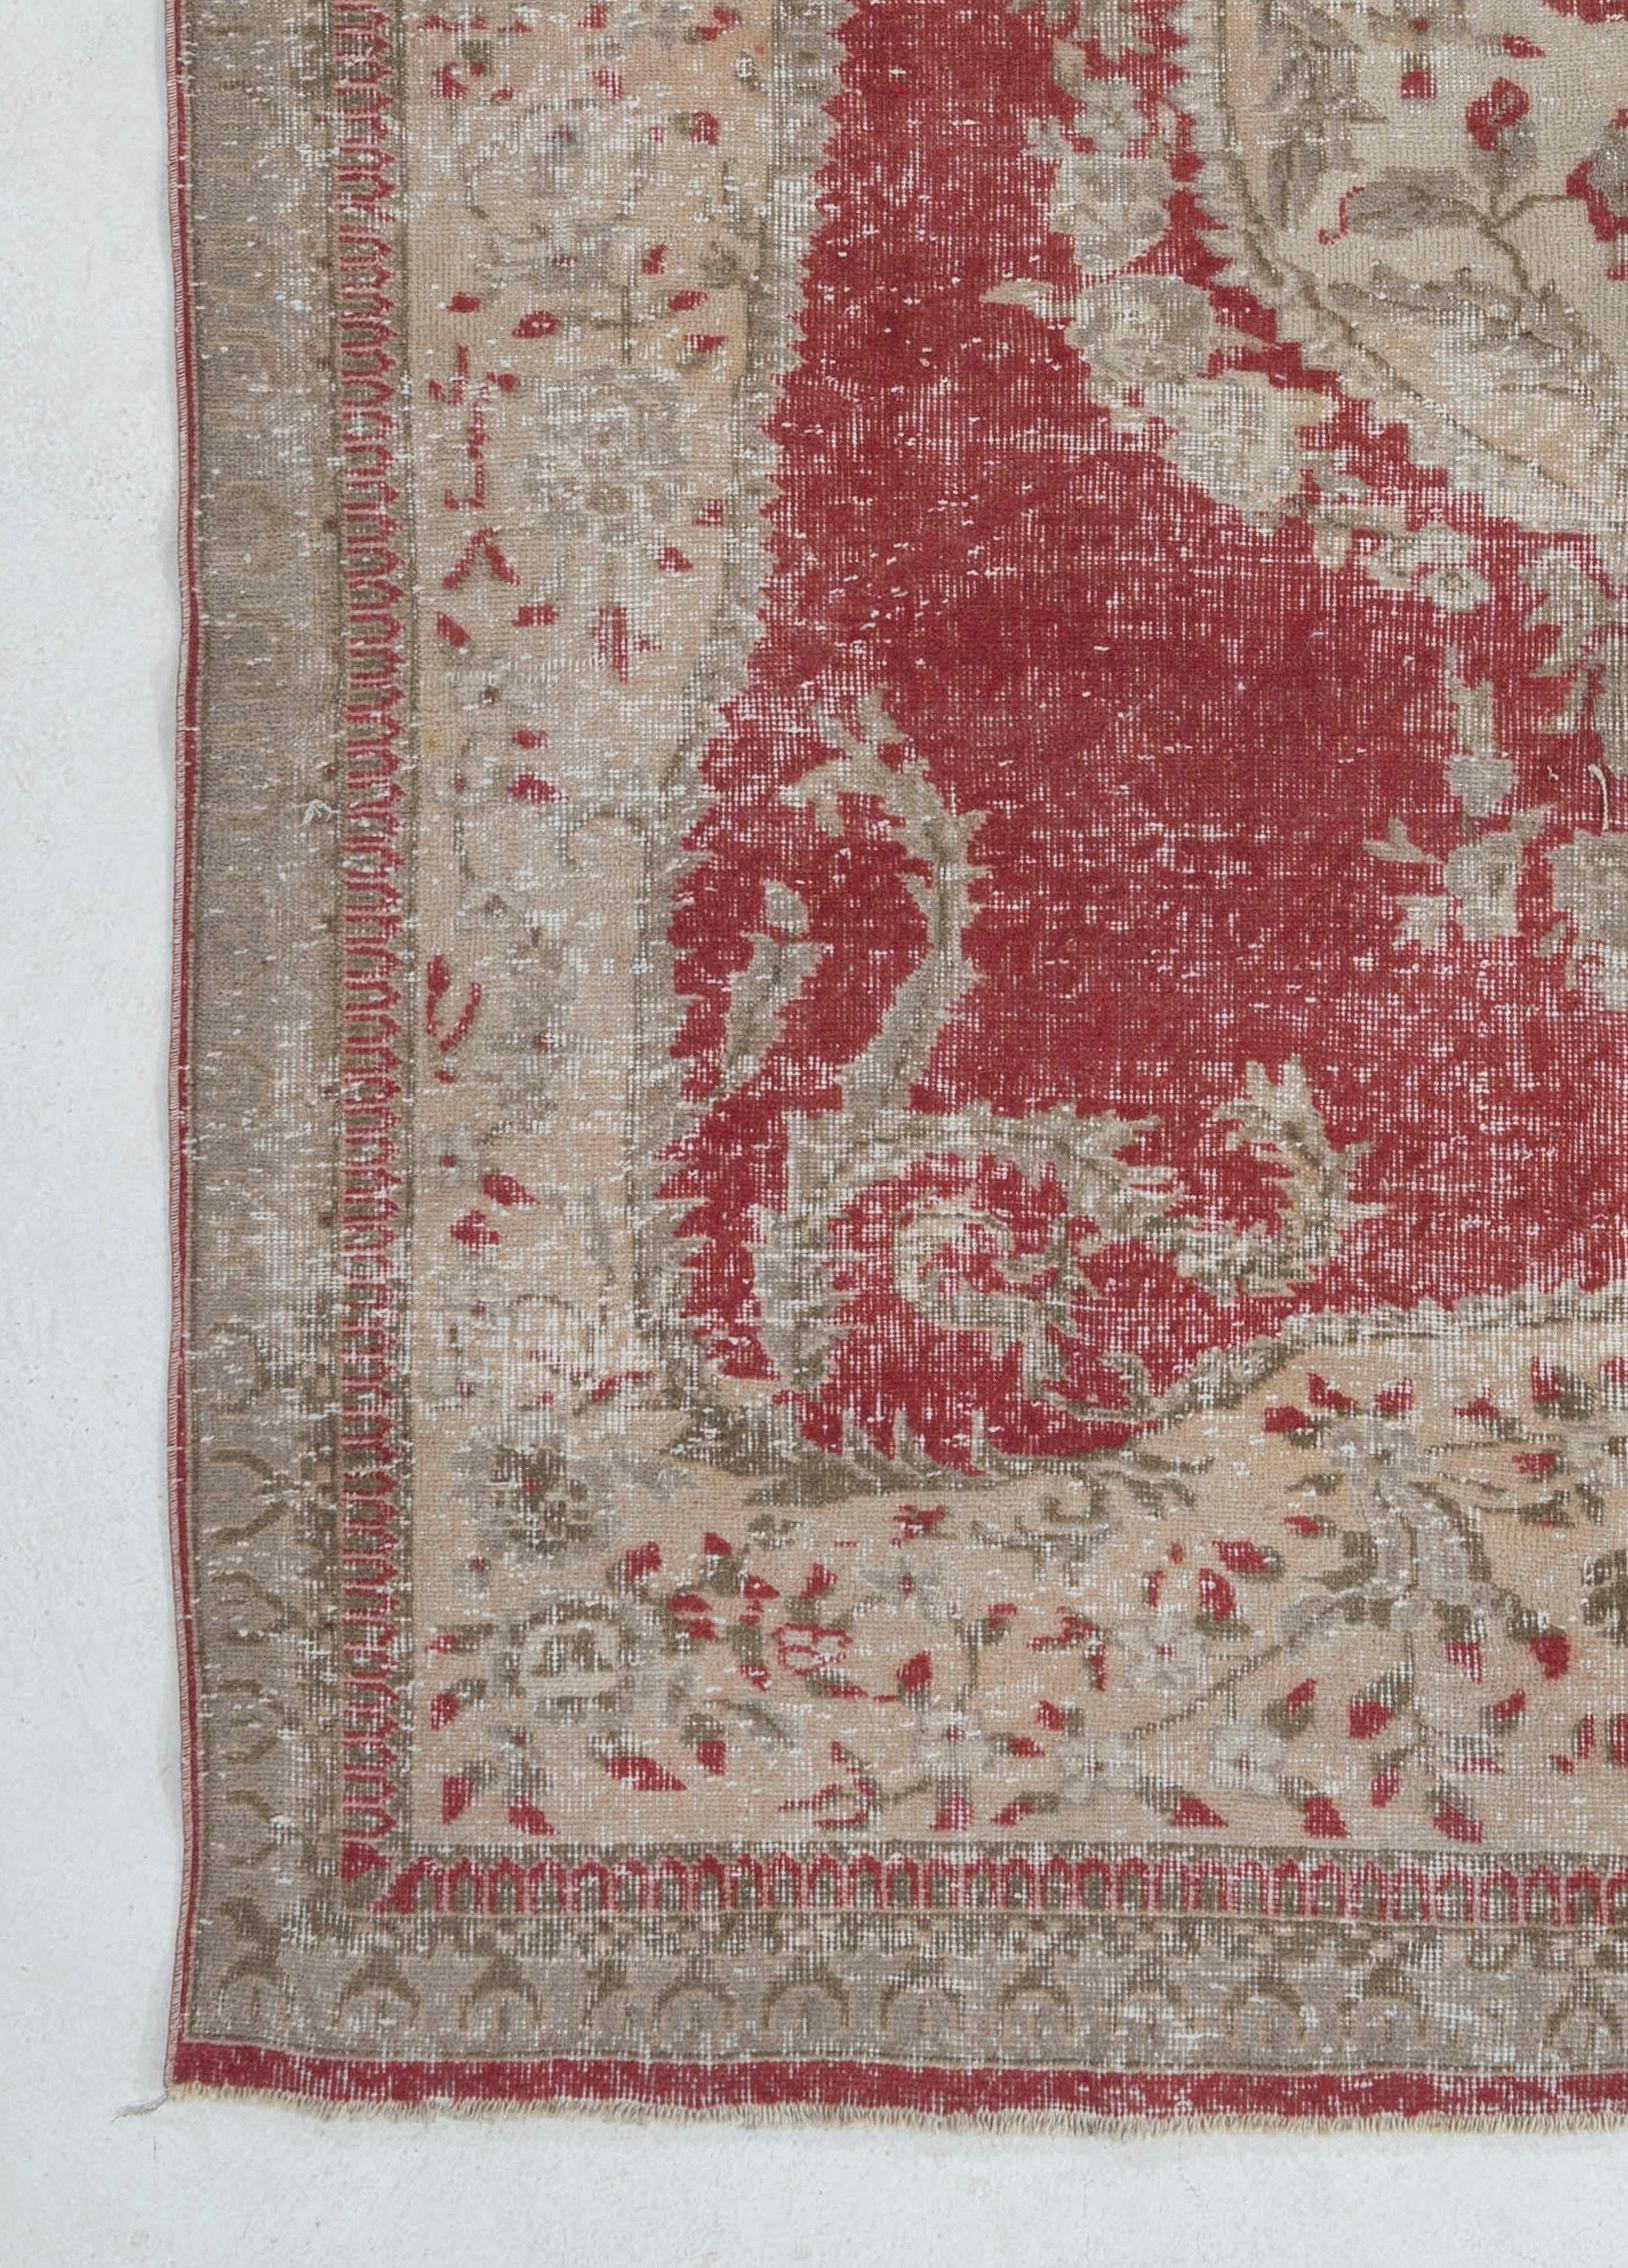 20th Century 6.5x9.5 Ft Vintage Aubusson Inspired Turkish Rug in Red, Beige & Taupe Colors For Sale